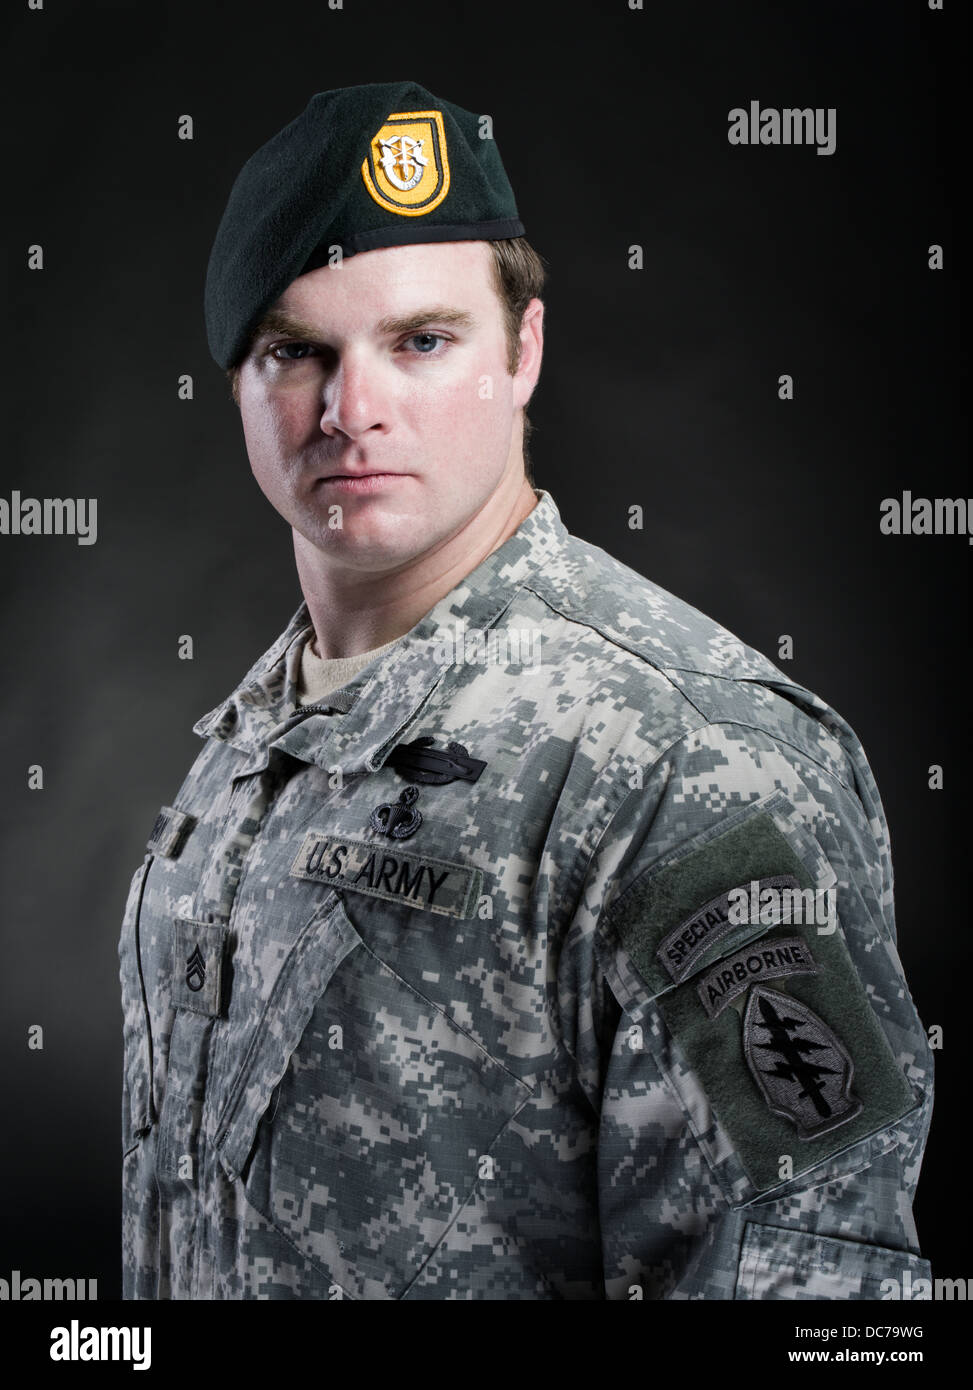 Portrait of a U.S. Army Special Forces Green Beret soldier Stock Photo -  Alamy